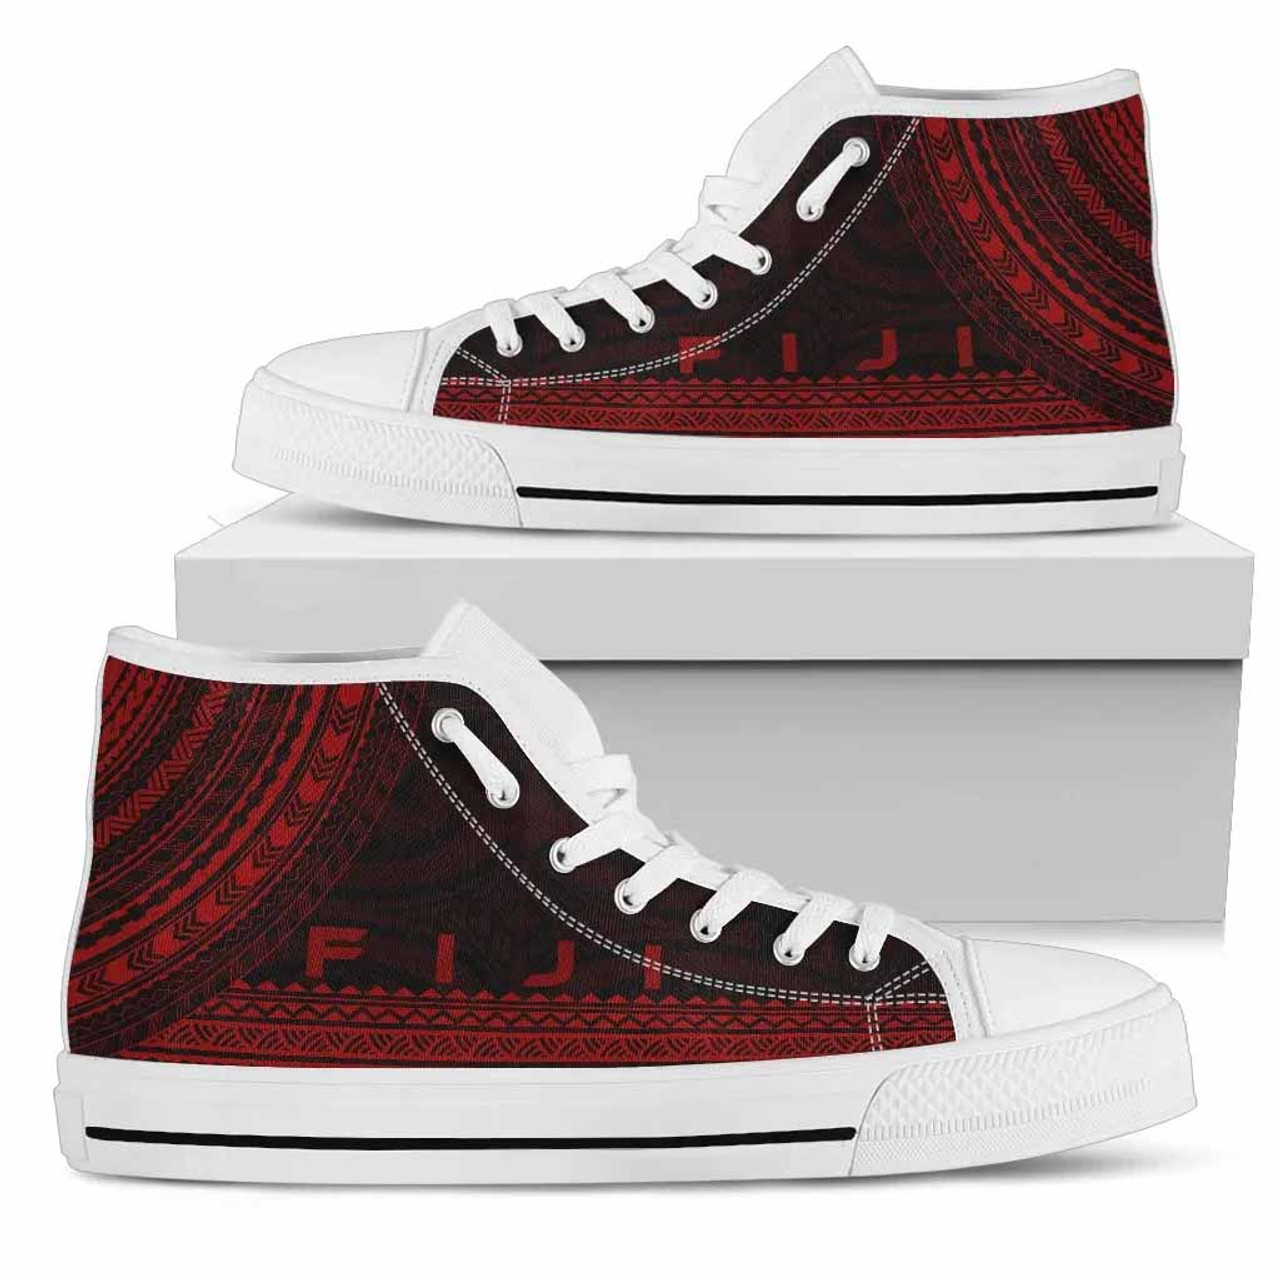 Fiji High Top Shoes - Polynesian Red Chief Version 1